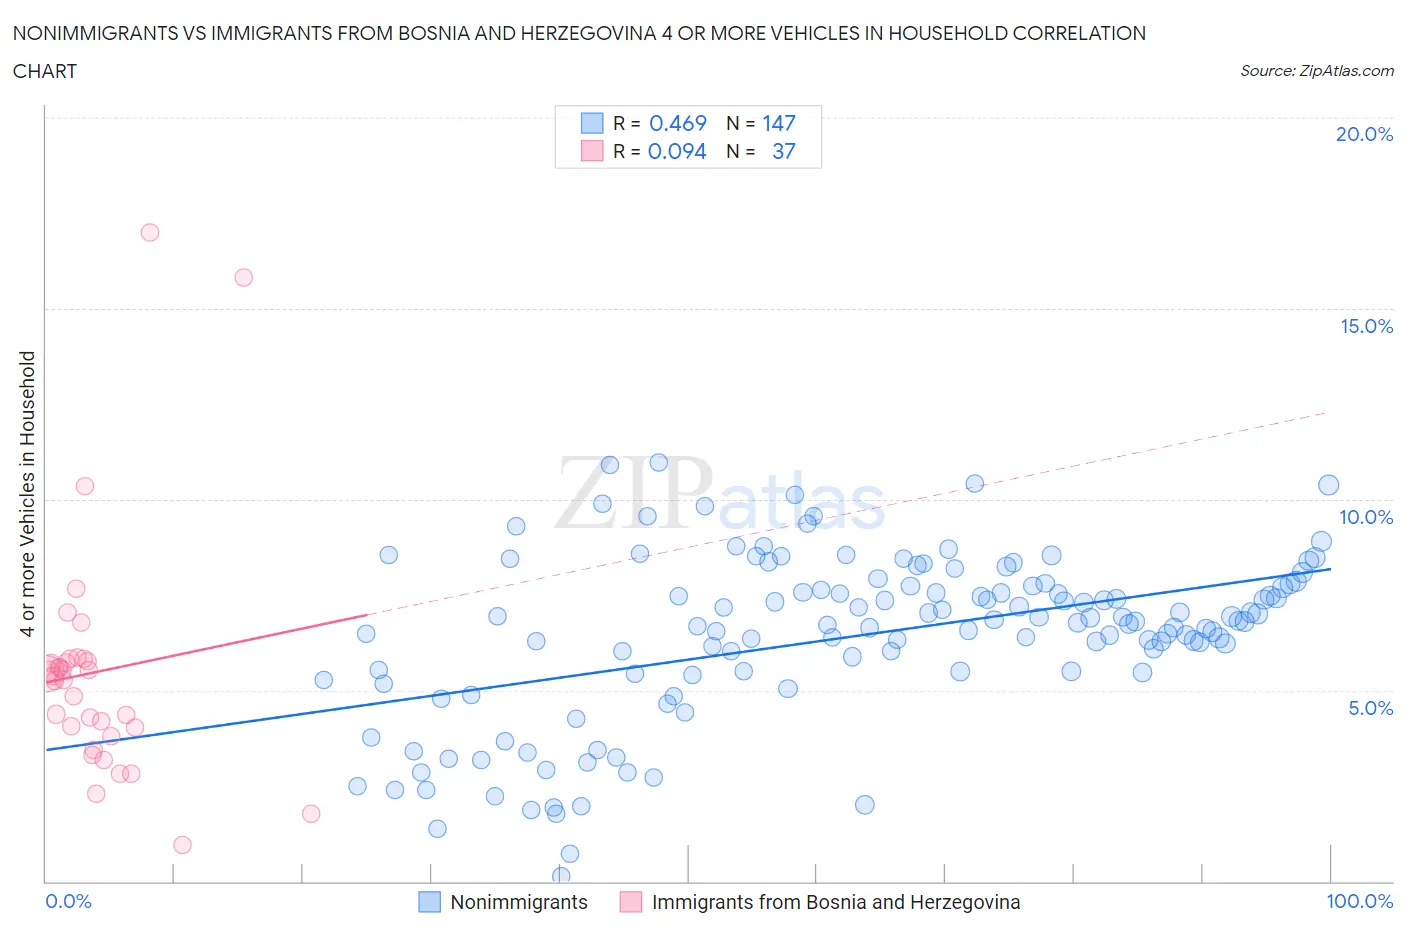 Nonimmigrants vs Immigrants from Bosnia and Herzegovina 4 or more Vehicles in Household